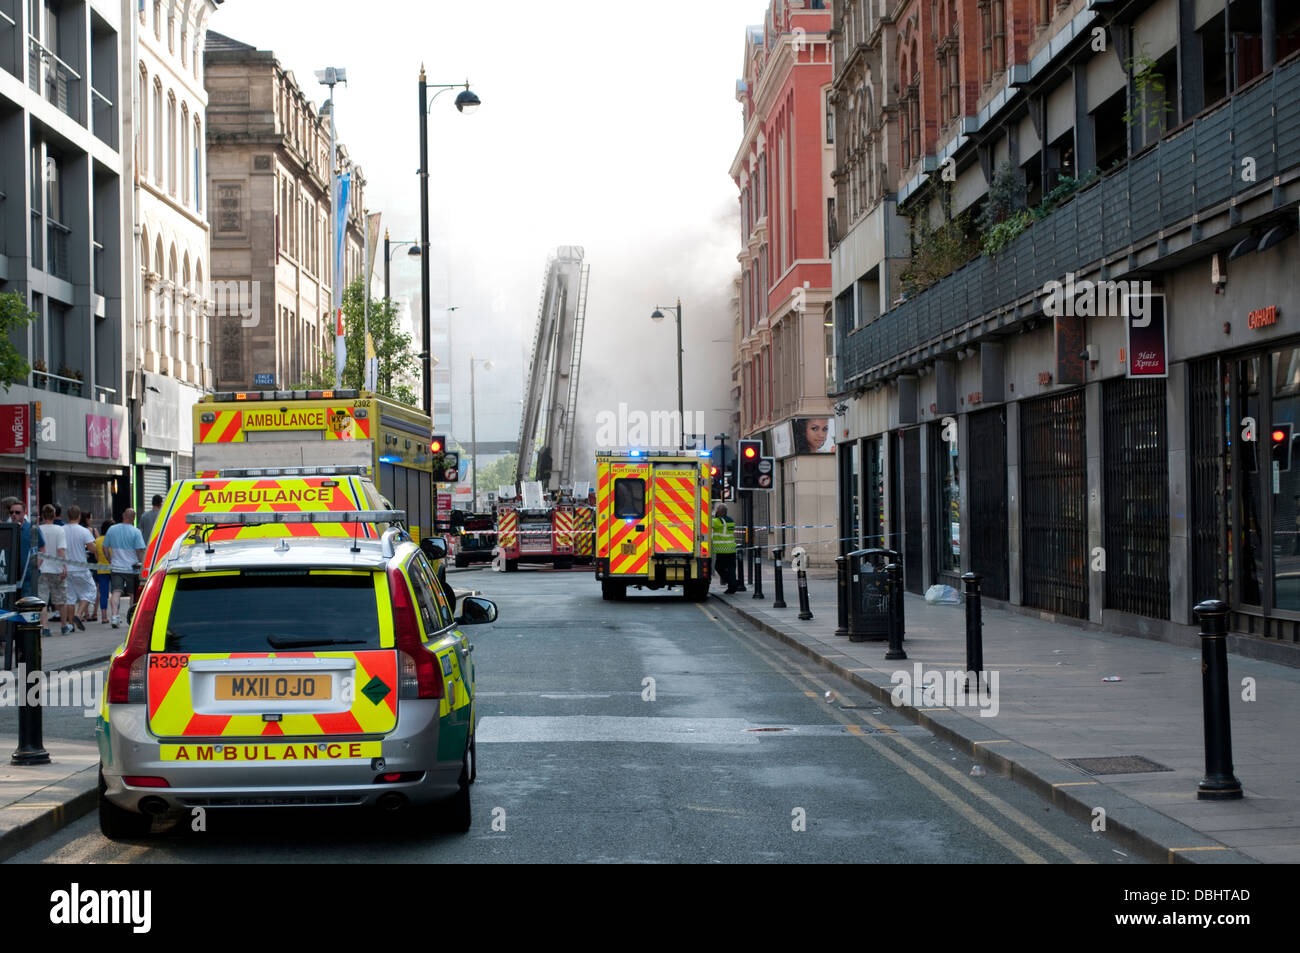 Fire in Oldham Street, Central Manchester, UK Stock Photo